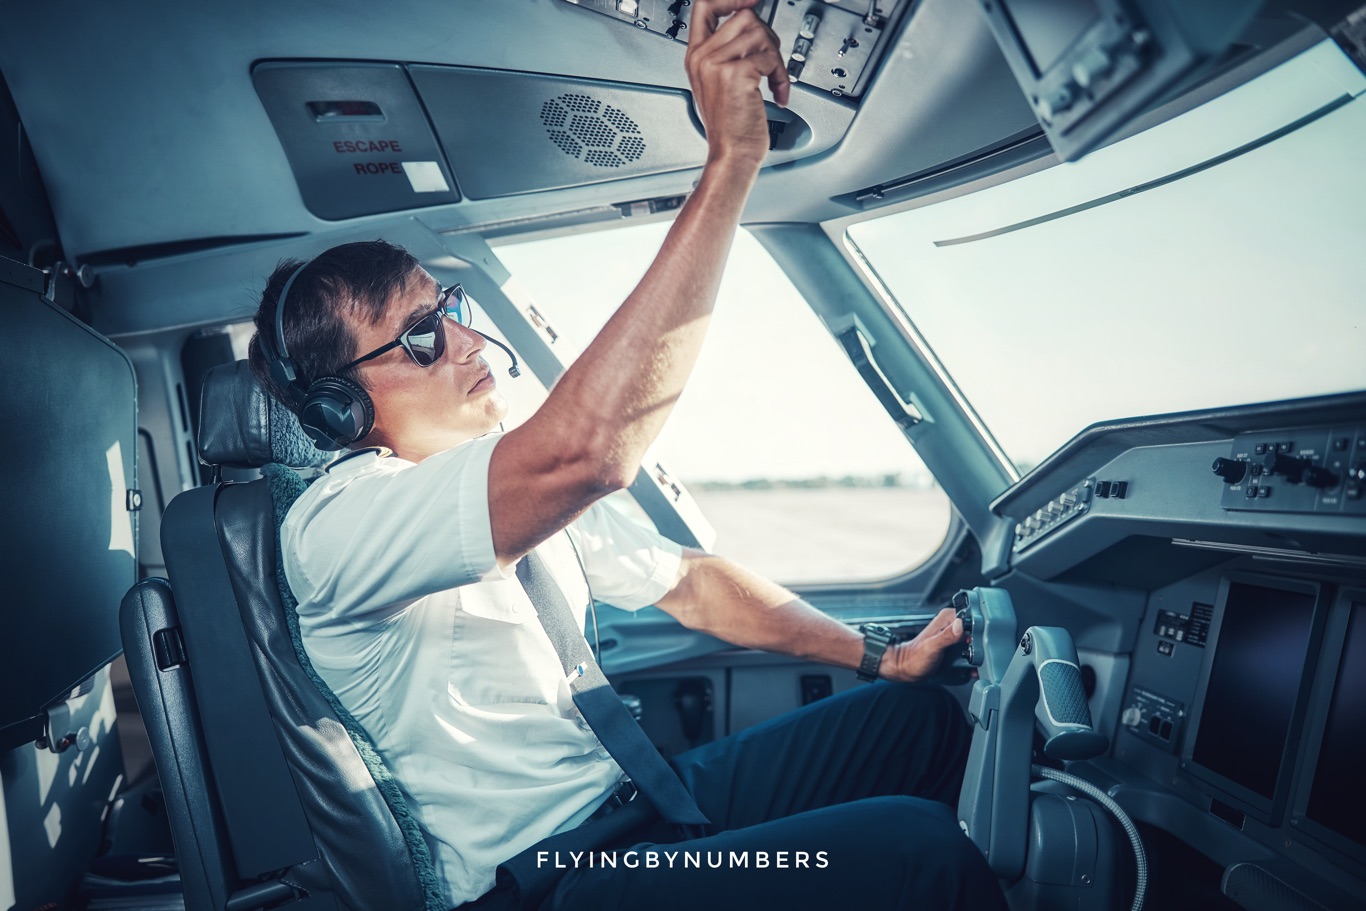 Airline pilot adjusts overhead switches in commercial aircraft cockpit